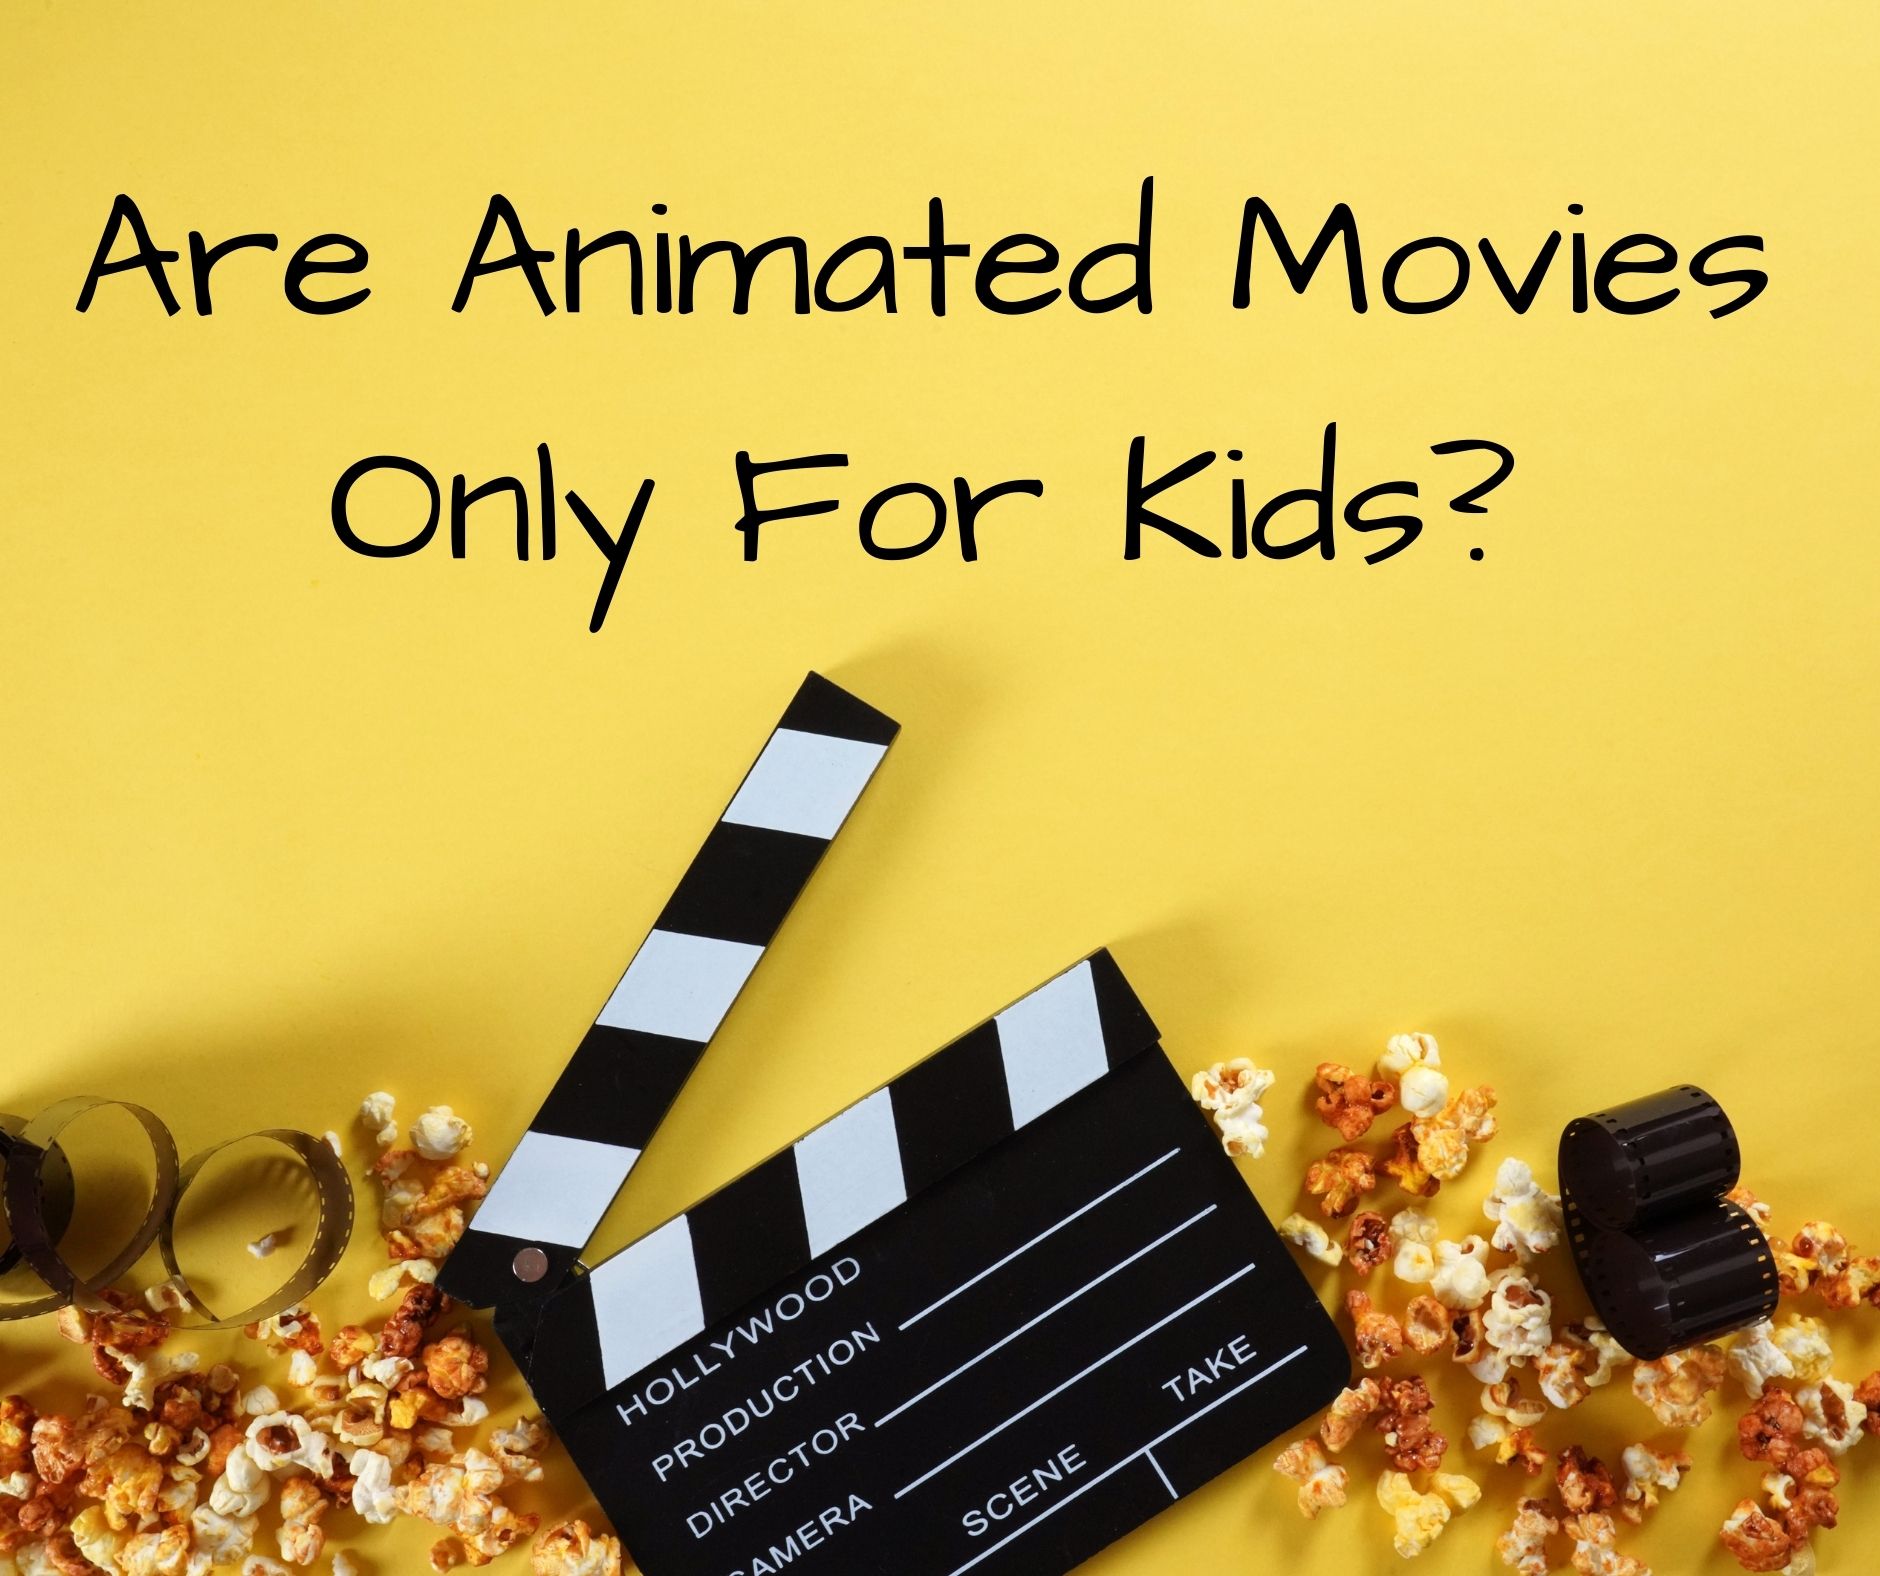 ARE ANIMATED MOVIES ONLY FOR KIDS?